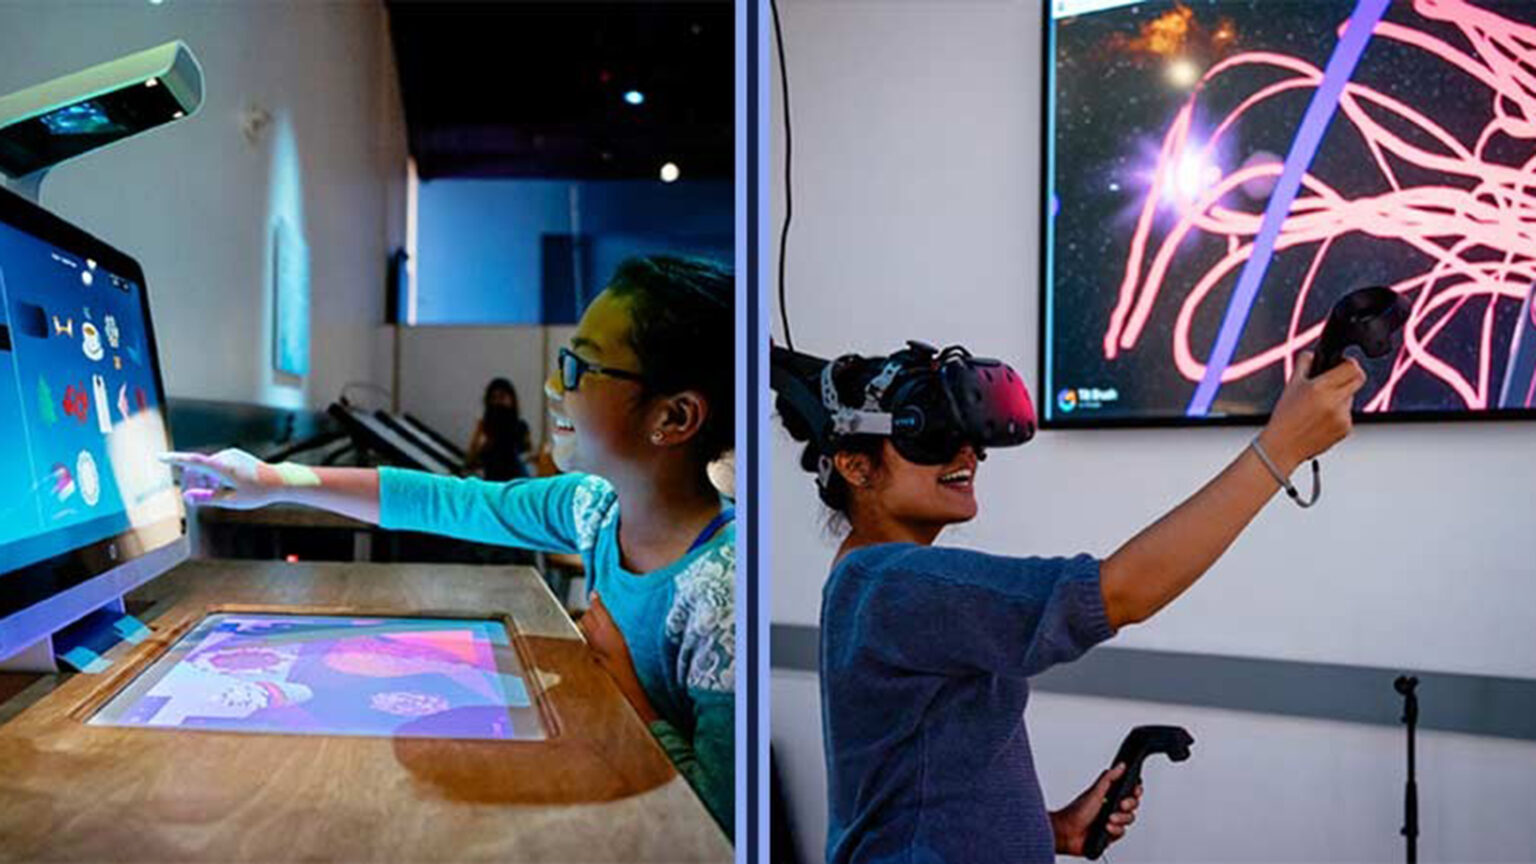 Images of two children doing virtual reality and computer touch screen activities